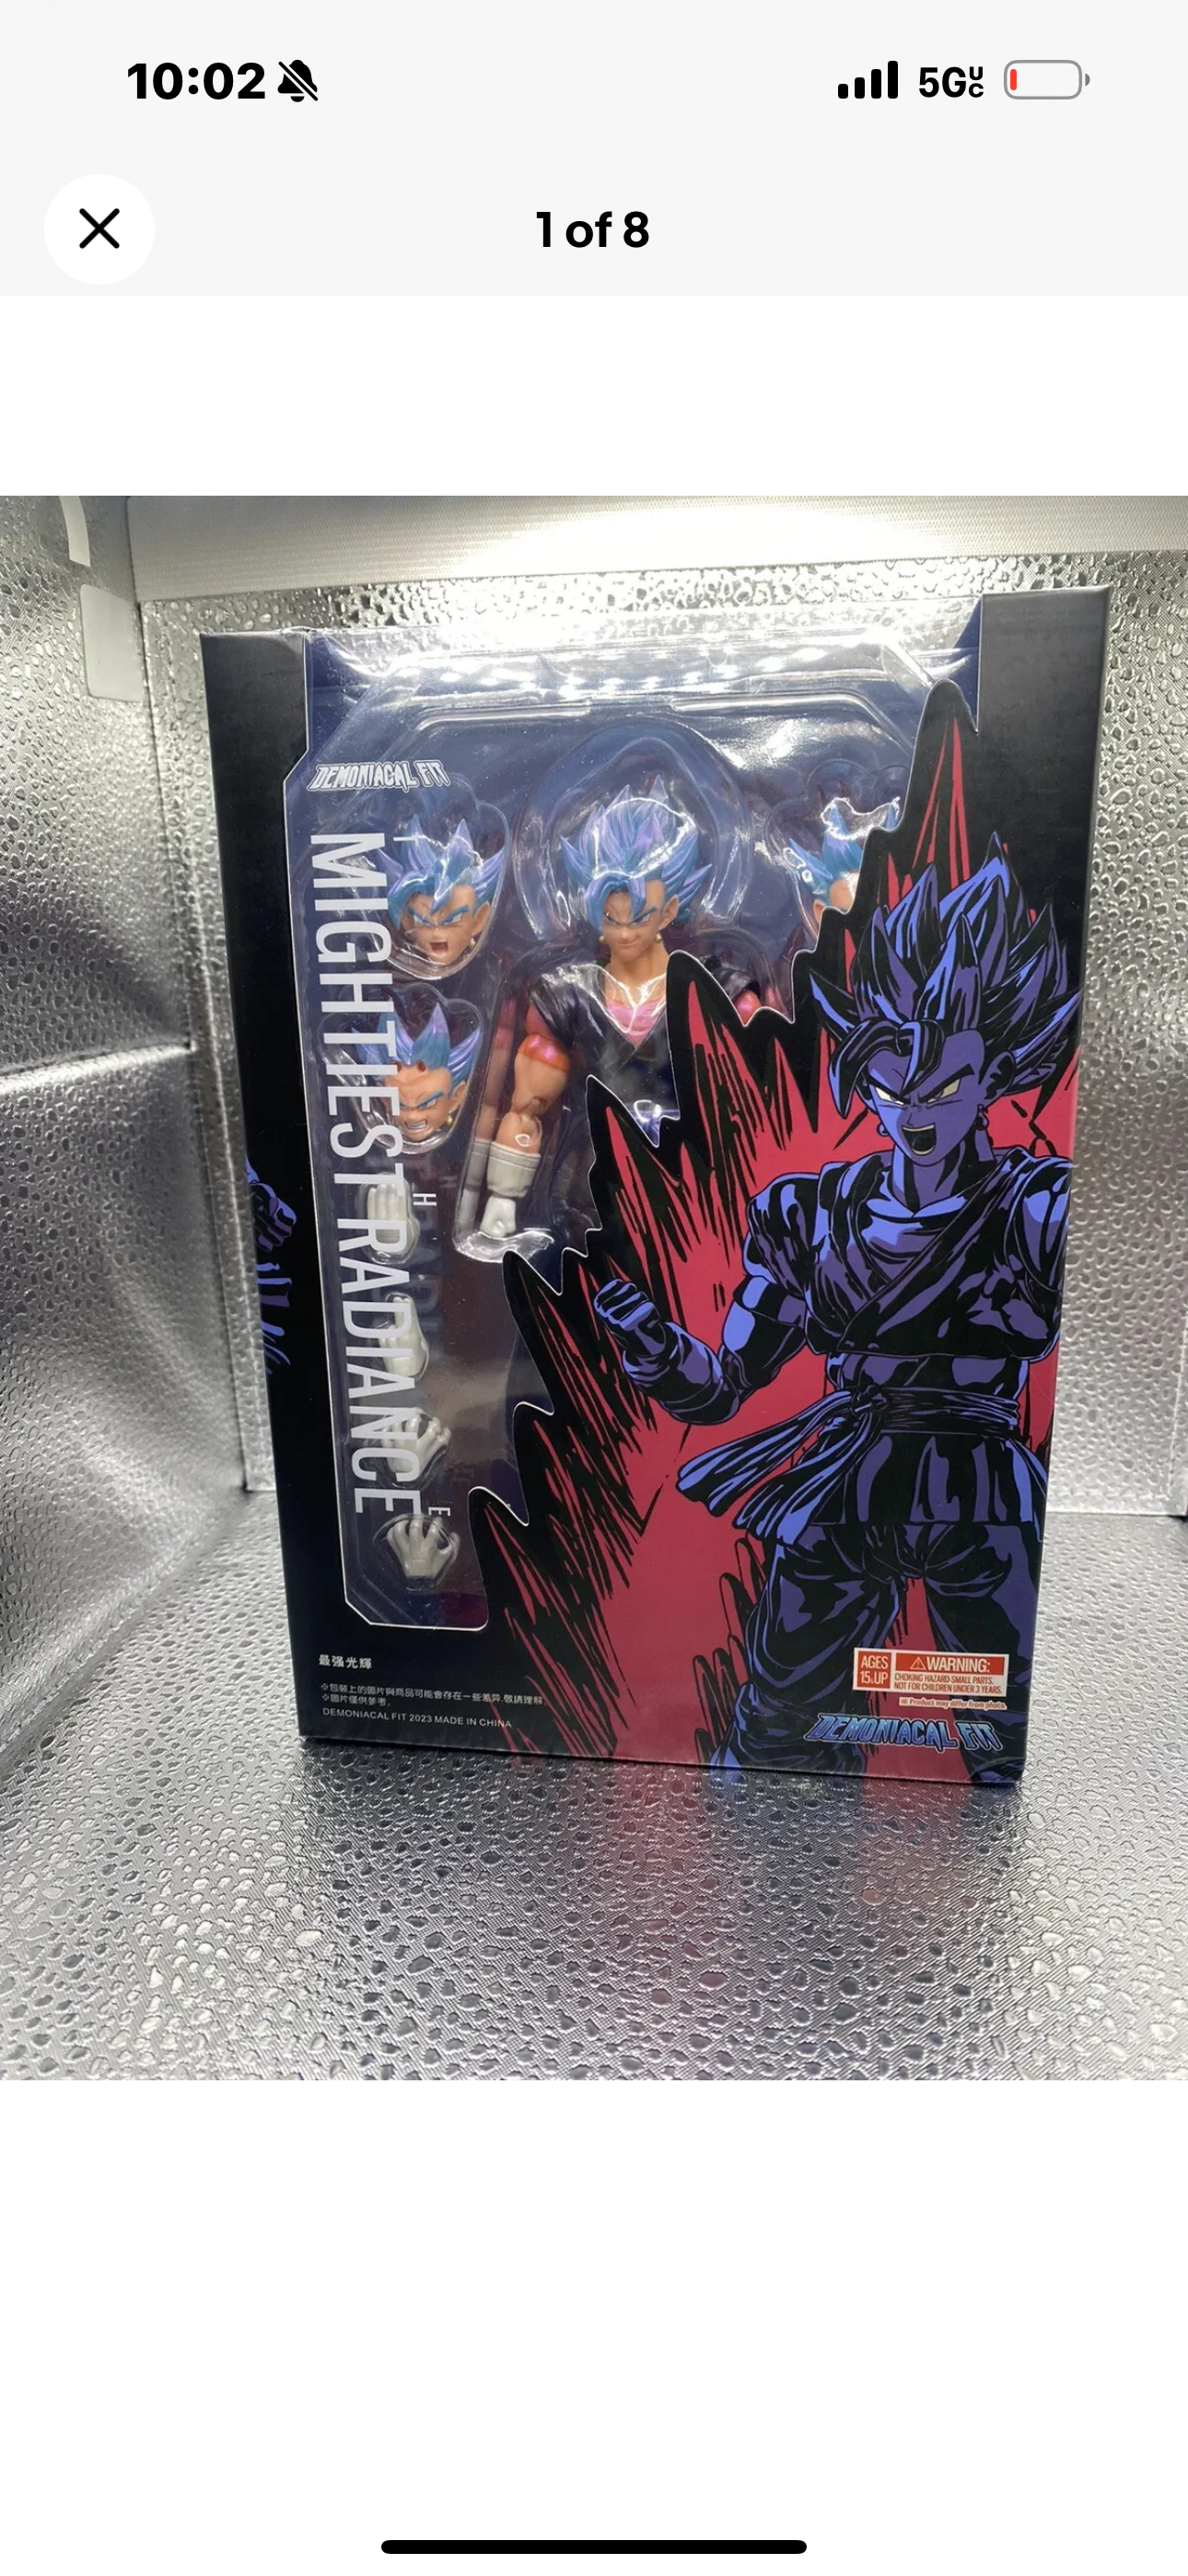 Demoniacal Fit - The Mightiest Radiance Super vegito Action Figure